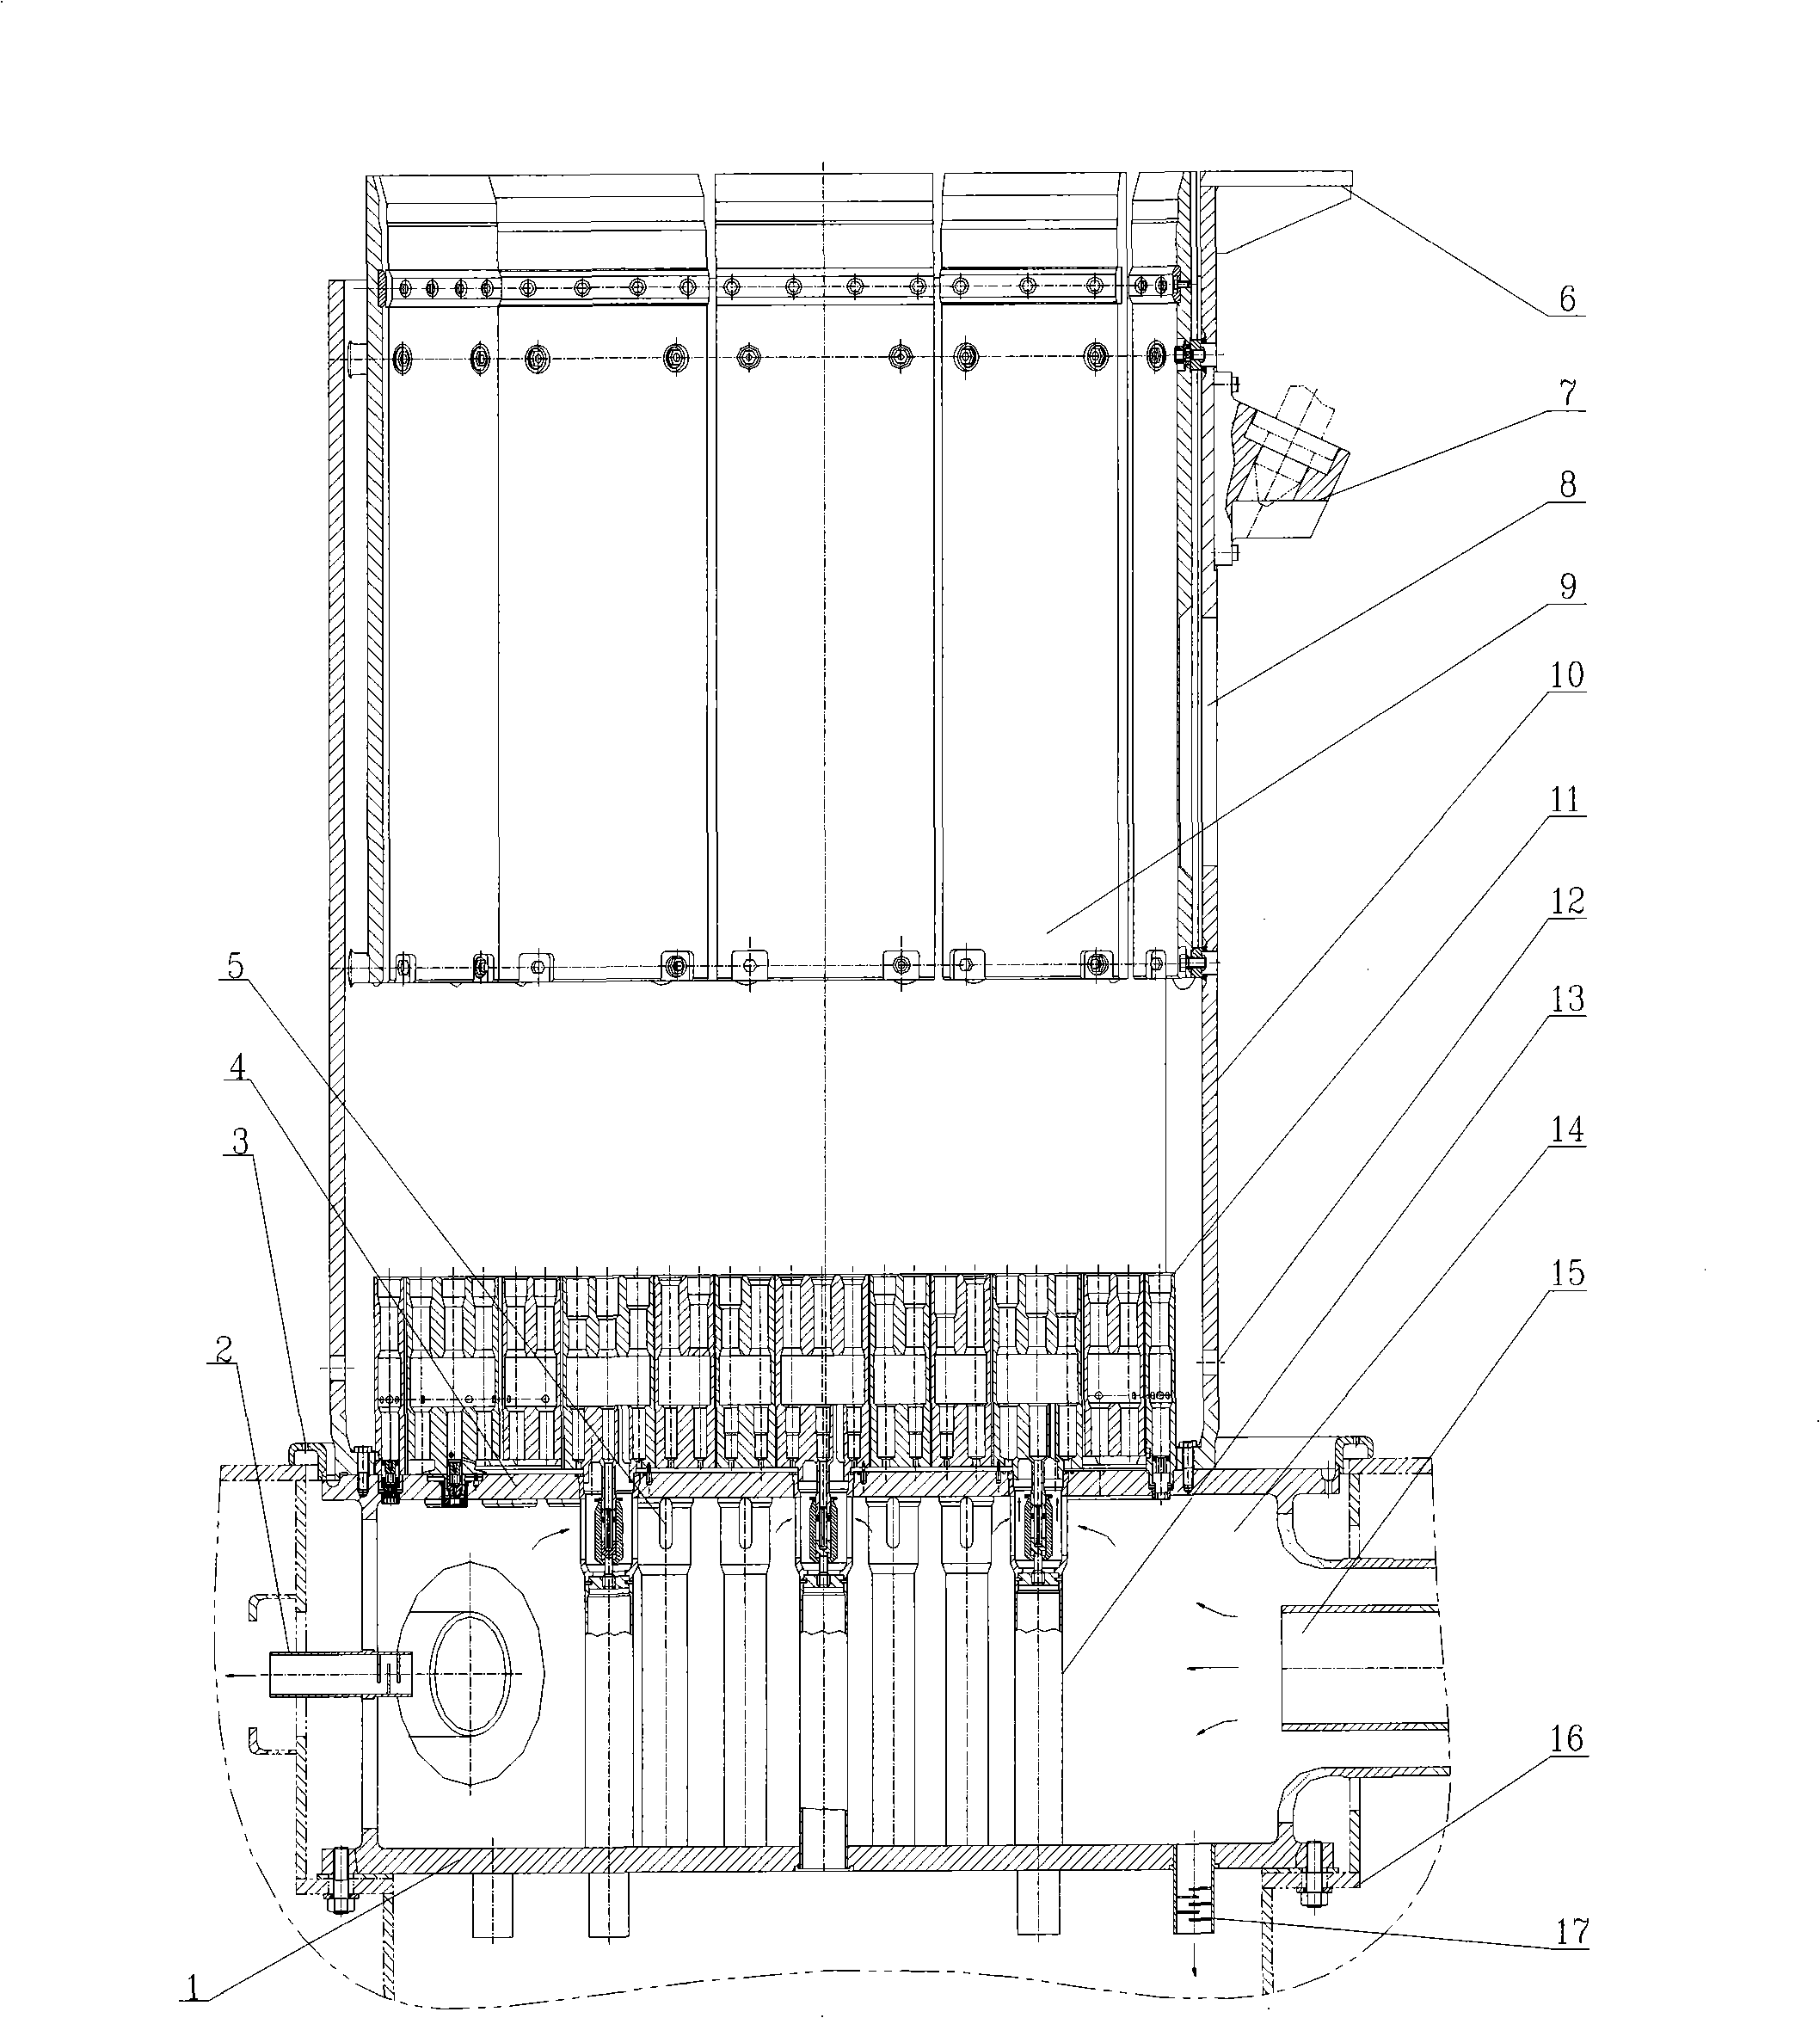 Reactor core support construction of pool type sodium-cooled fast reactor